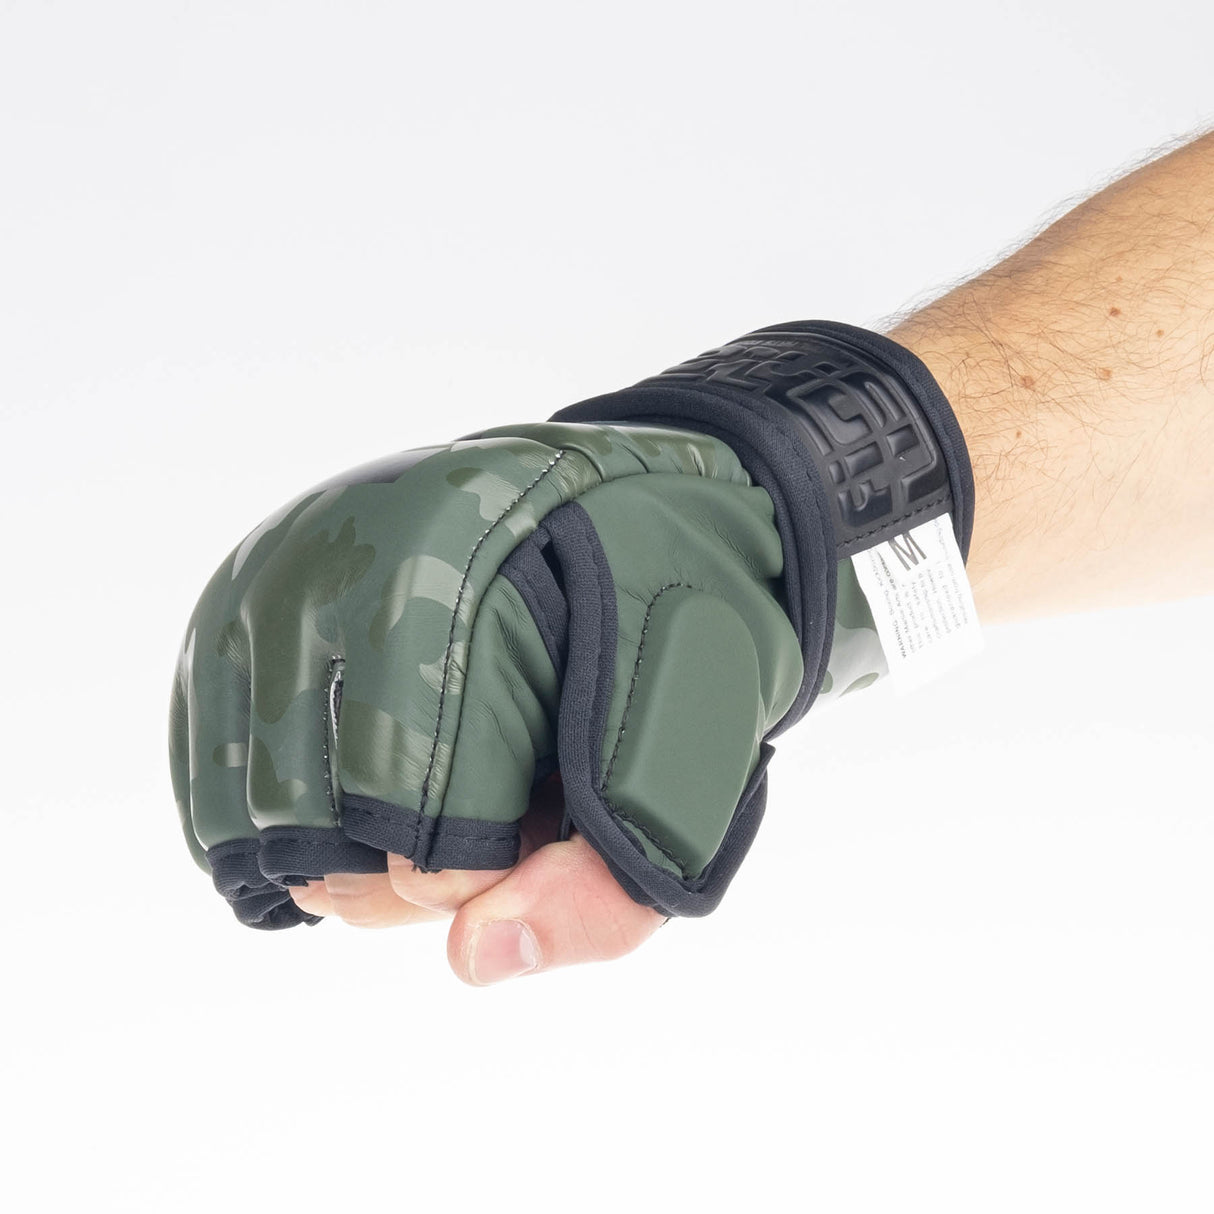 Fighter MMA Handschuhe Competition - khaki camo, FMG-002CKH